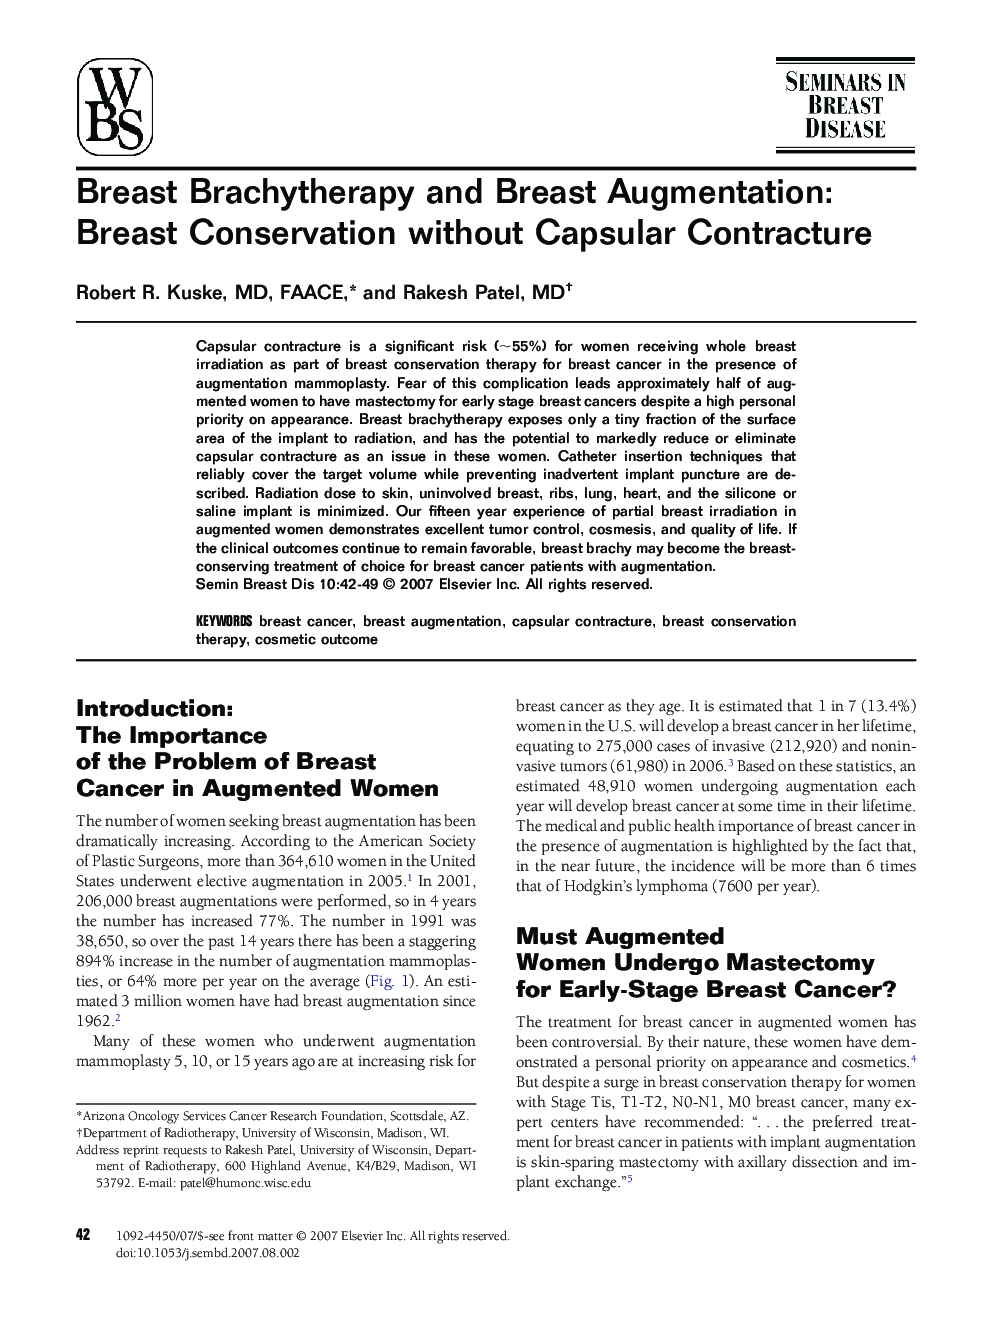 Breast Brachytherapy and Breast Augmentation: Breast Conservation without Capsular Contracture